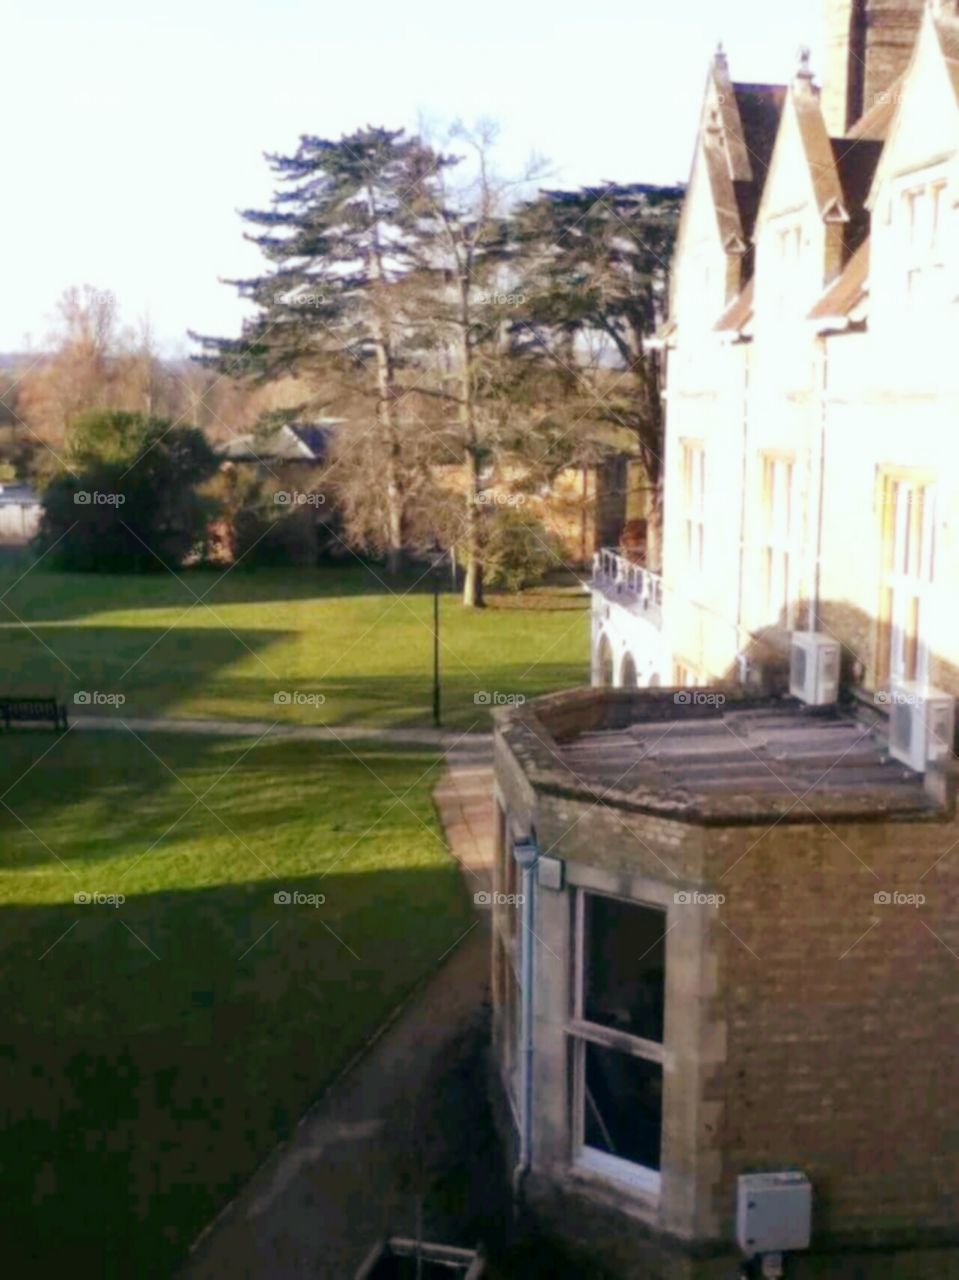 View through my dormitory room, St Hilda's college